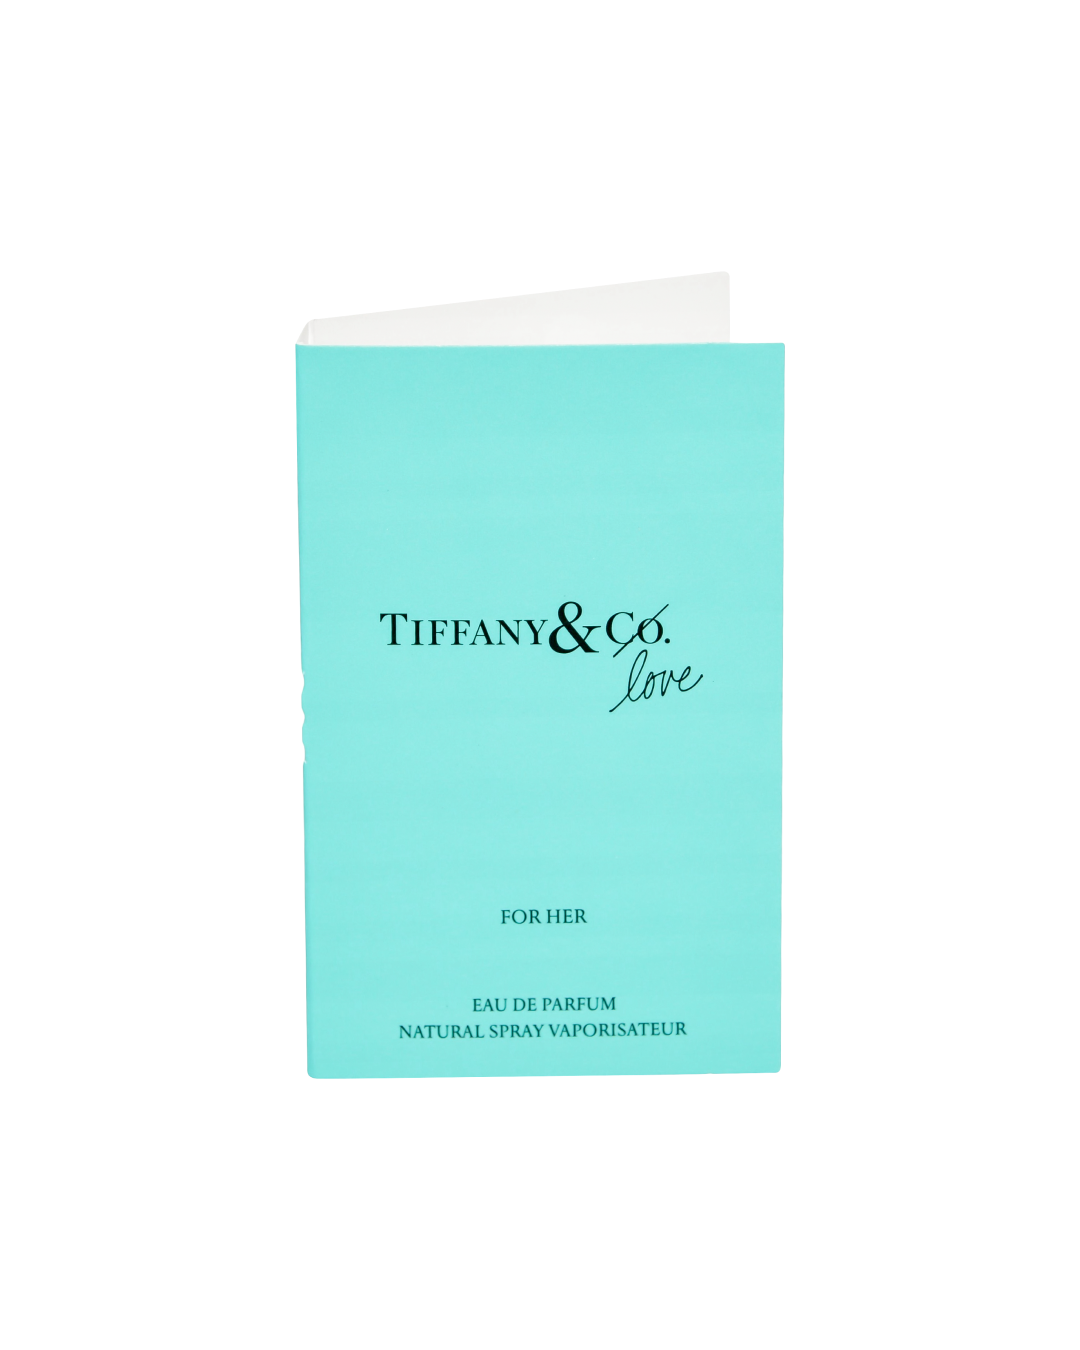 Tiffany & Co. Tiffany & Love EDP for Her Travel Vial (1.2ml) - Best Buy World Philippines